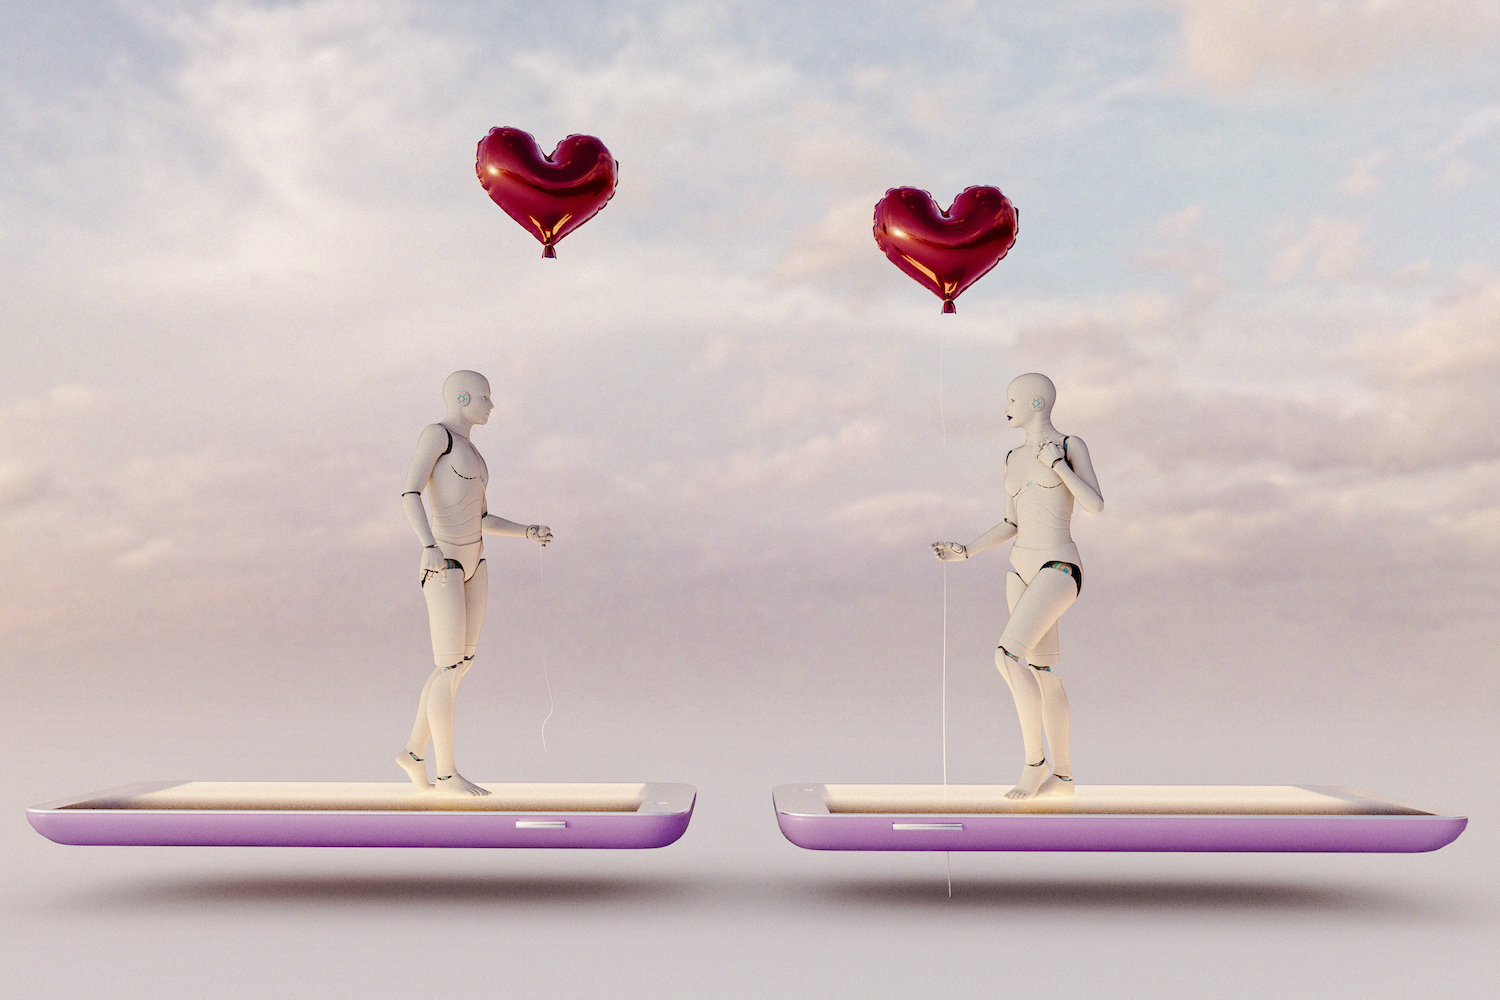 male and female artificial intelligences meet holding red balloons while standing on mobile phones